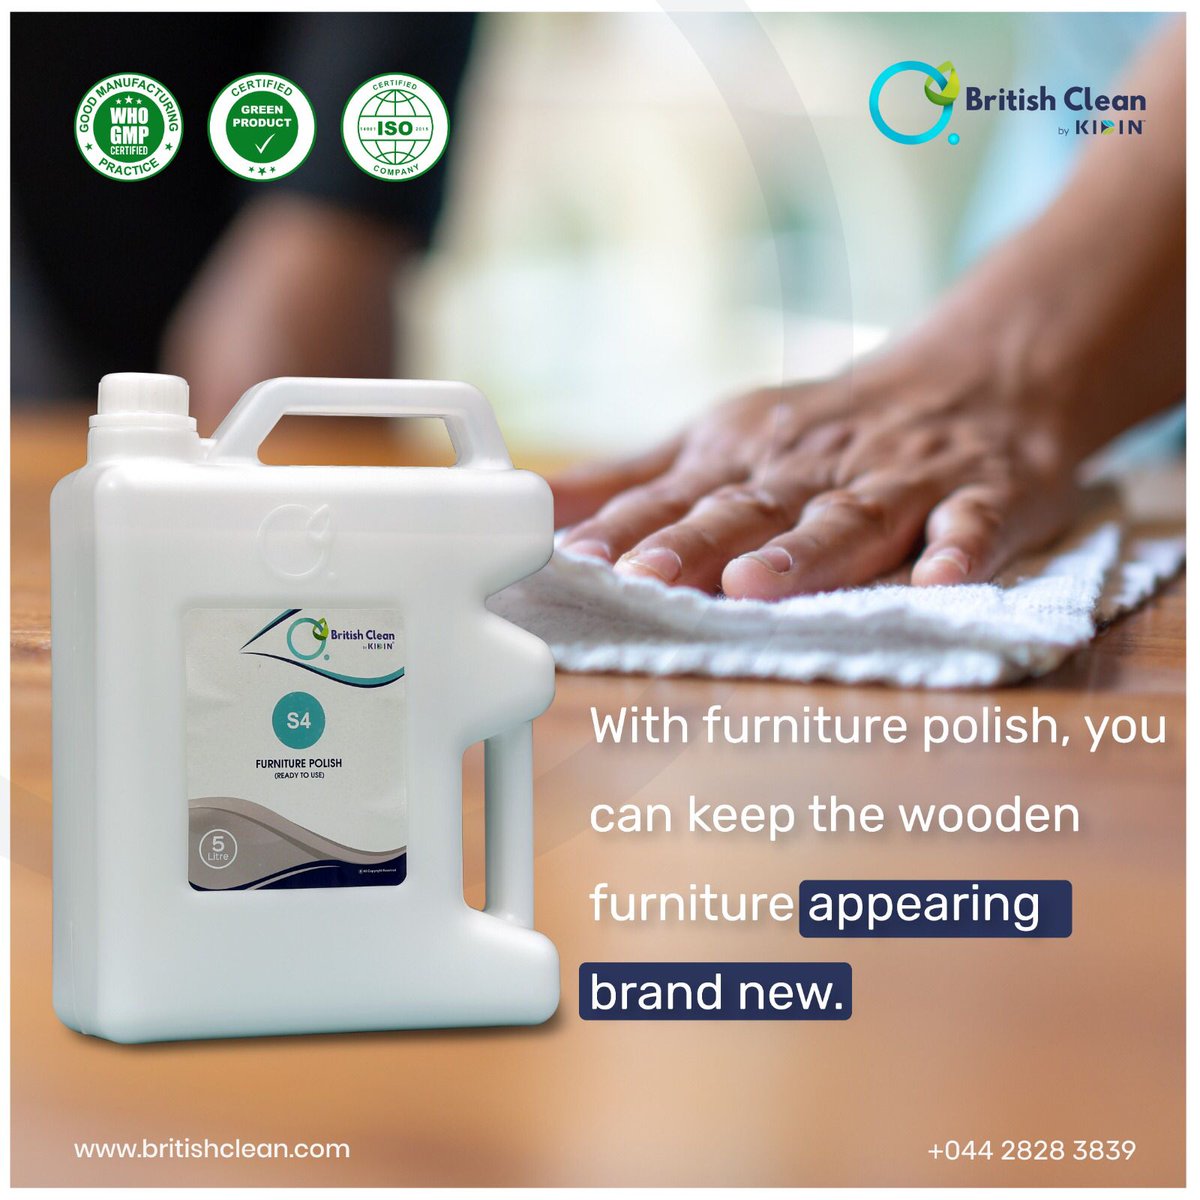 Bring back the shine and shimmer! Give your wooden furniture and leather surfaces a makeover with our expertly designed '#FurniturePolish'.

For orders :
Call - 044 28283839
Mail us at - info@britishclean.com

#britishclean #cleaning #clean #dishwash